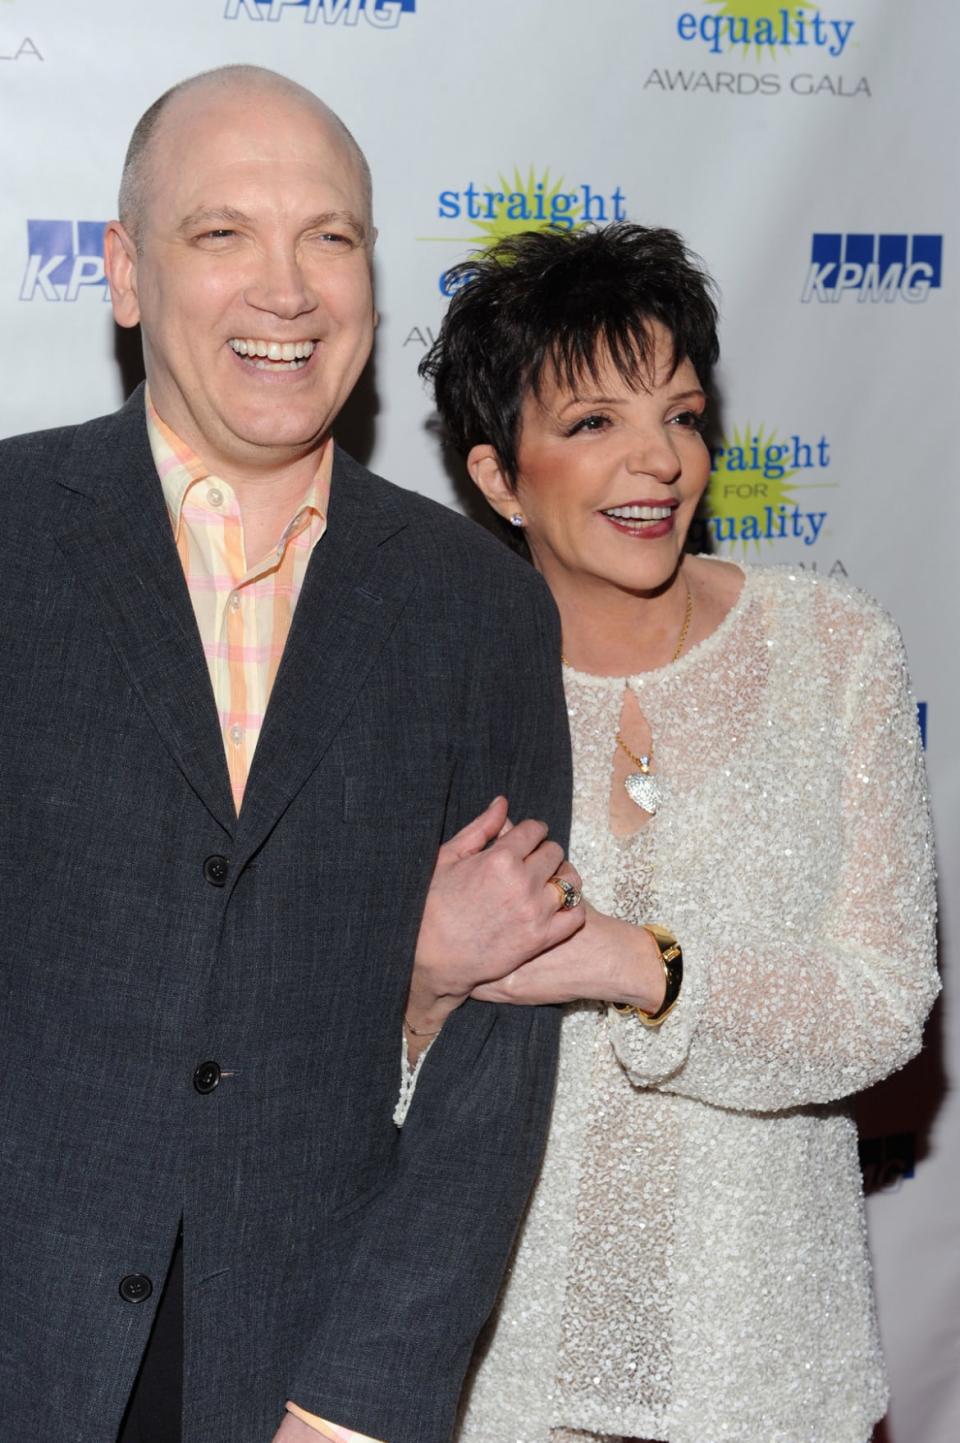 <div class="inline-image__caption"><p>Charles Busch and Liza Minnelli attend PFLAG's 2nd Annual Straight for Equality Awards Gala at the Marriott Marquis on May 1, 2010 in New York City.</p></div> <div class="inline-image__credit">Henry S. Dziekan III/Getty</div>